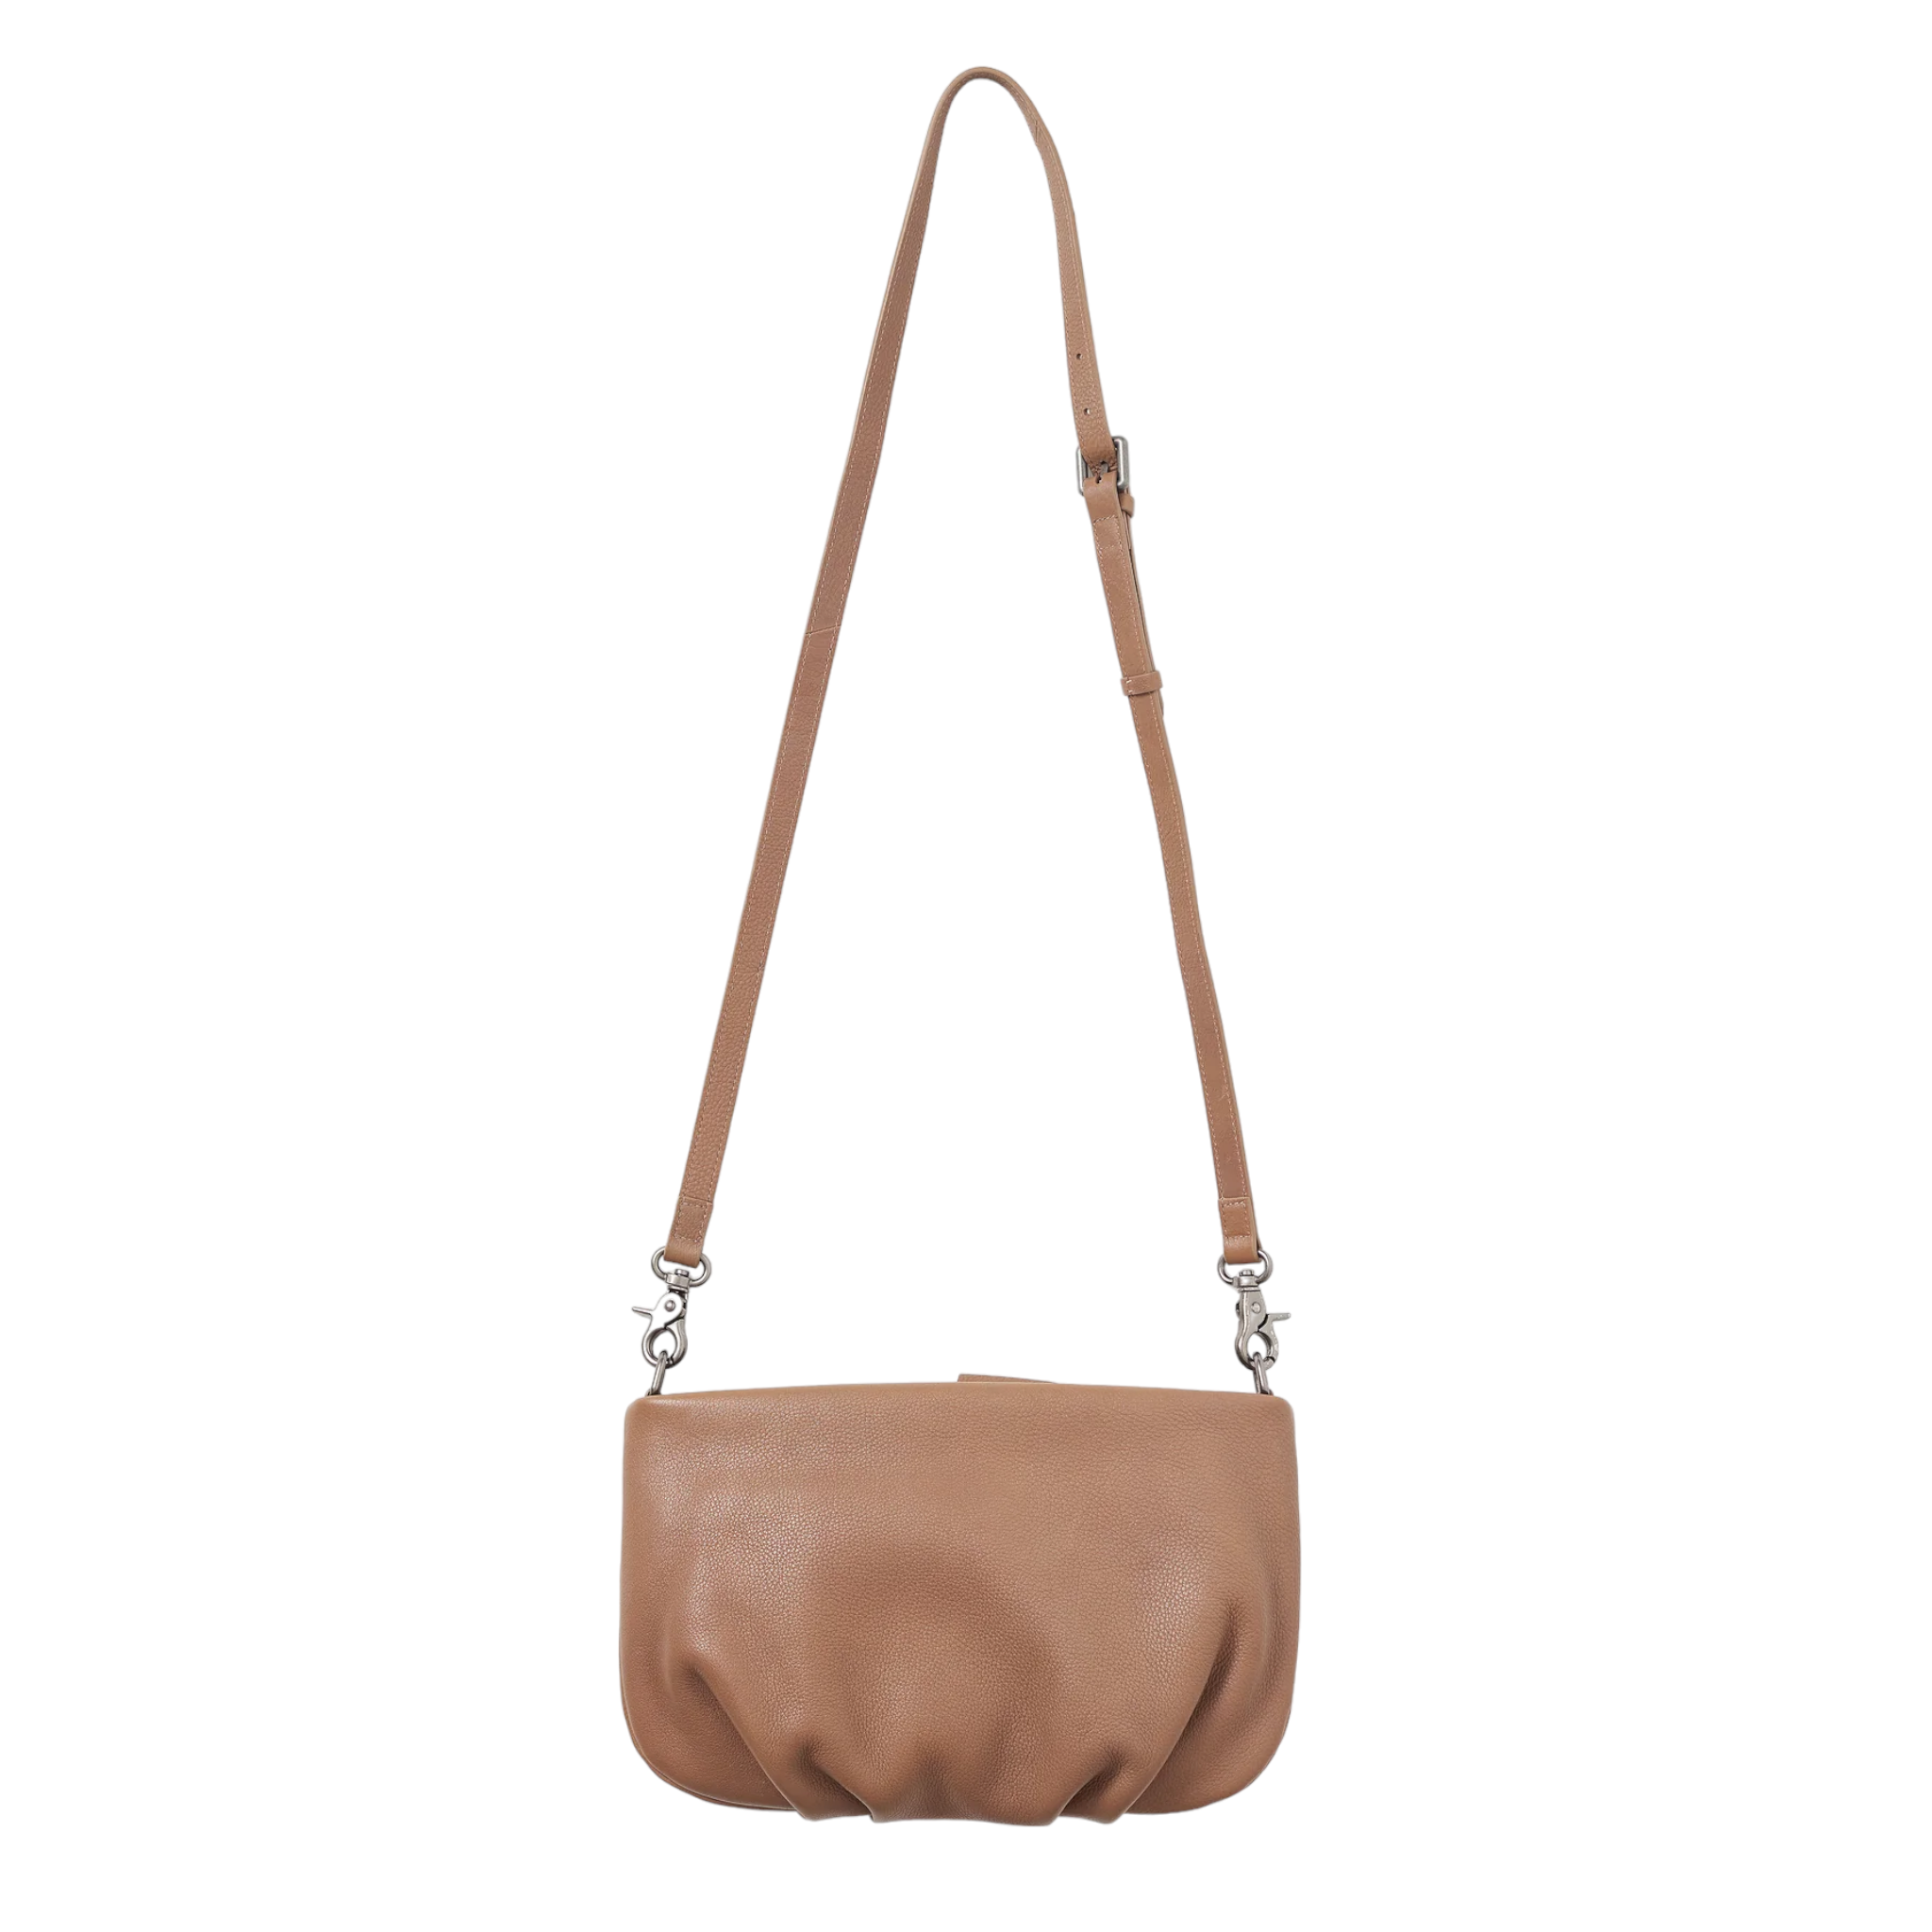 Shop Briarwood Sienna - with shoe&me - from Briarwood - Bags - Handbag, Summer, Winter, Womens - [collection]